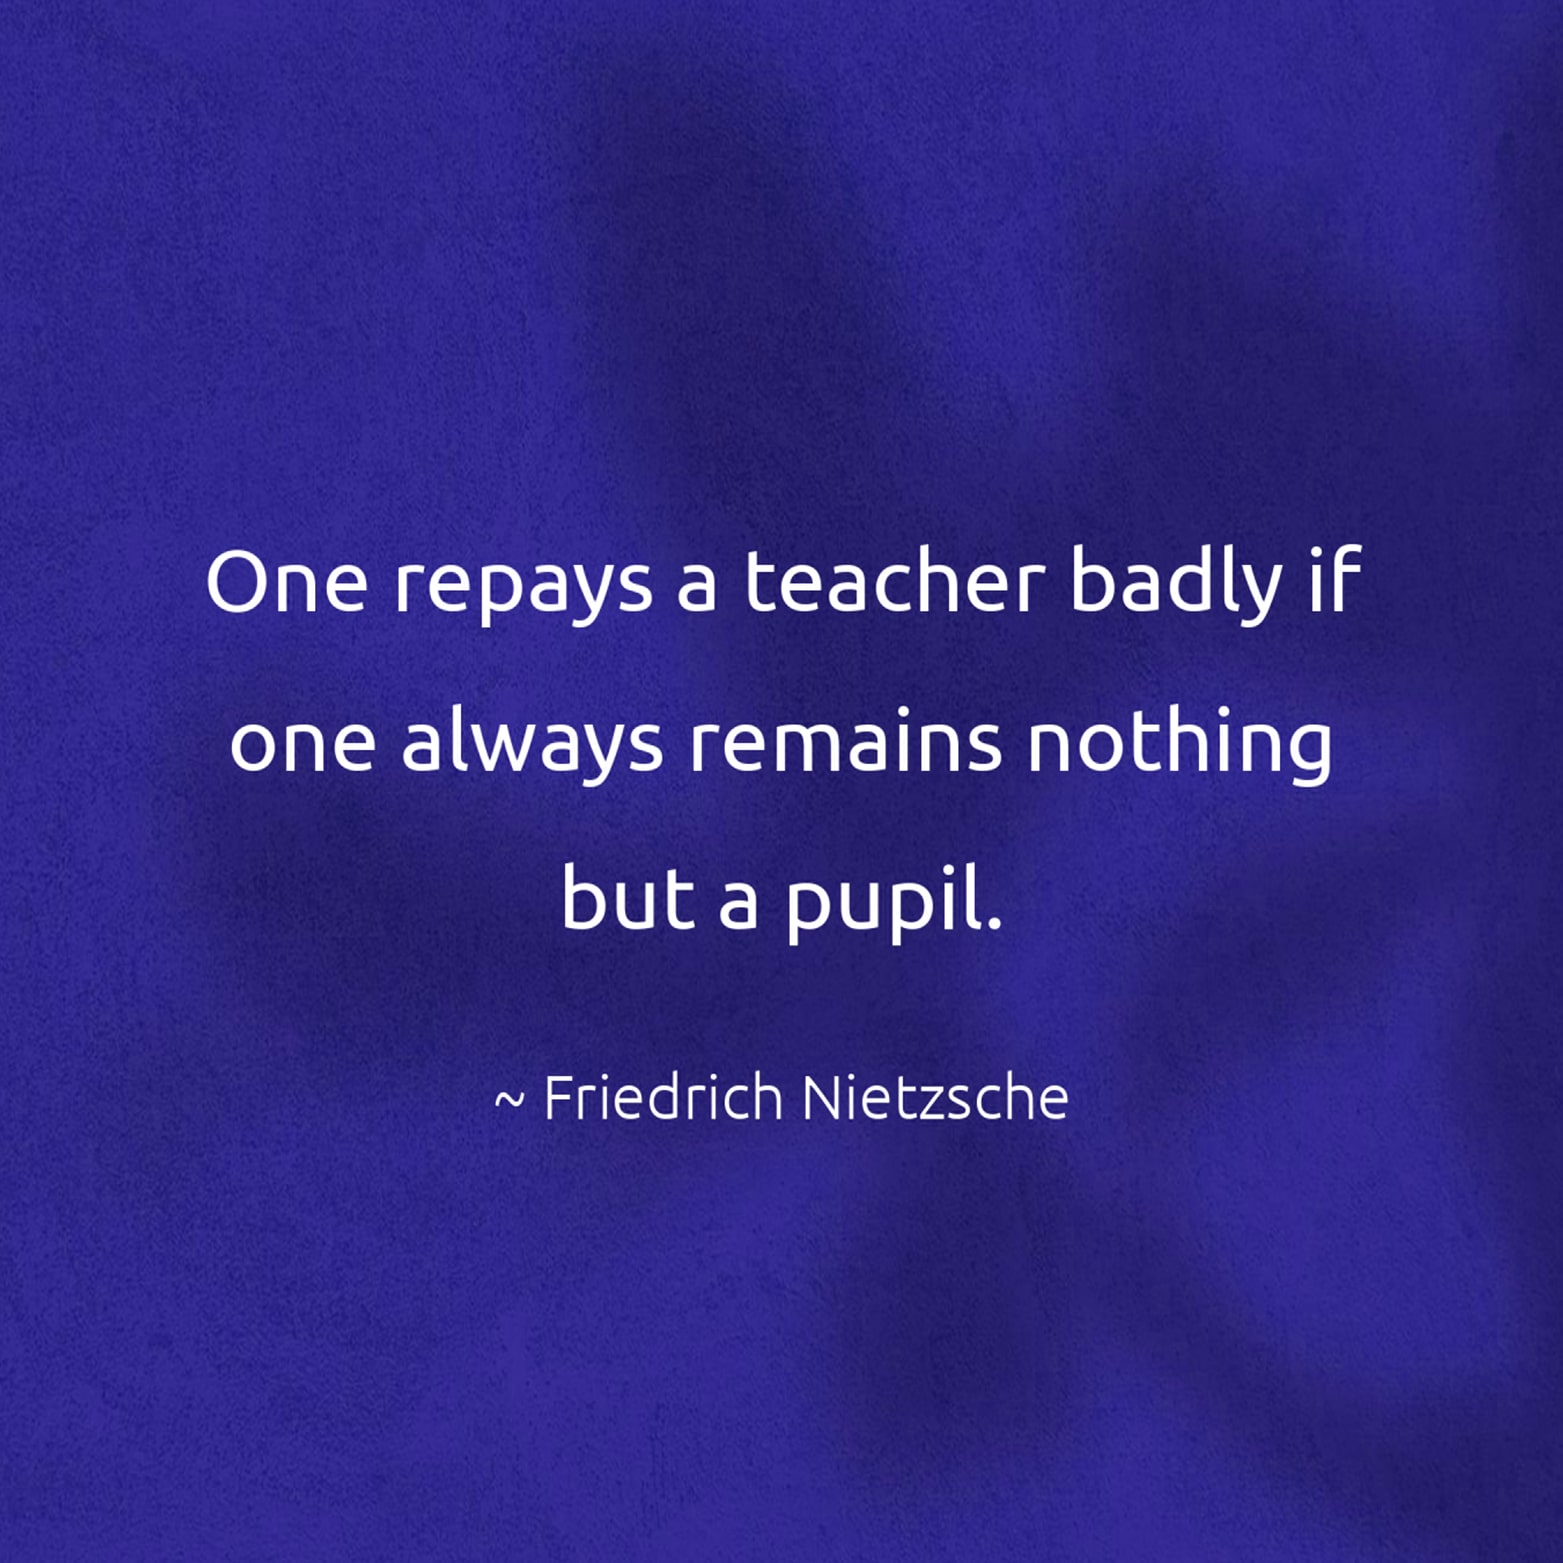 One repays a teacher badly if one always remains nothing but a pupil. - Friedrich Nietzsche